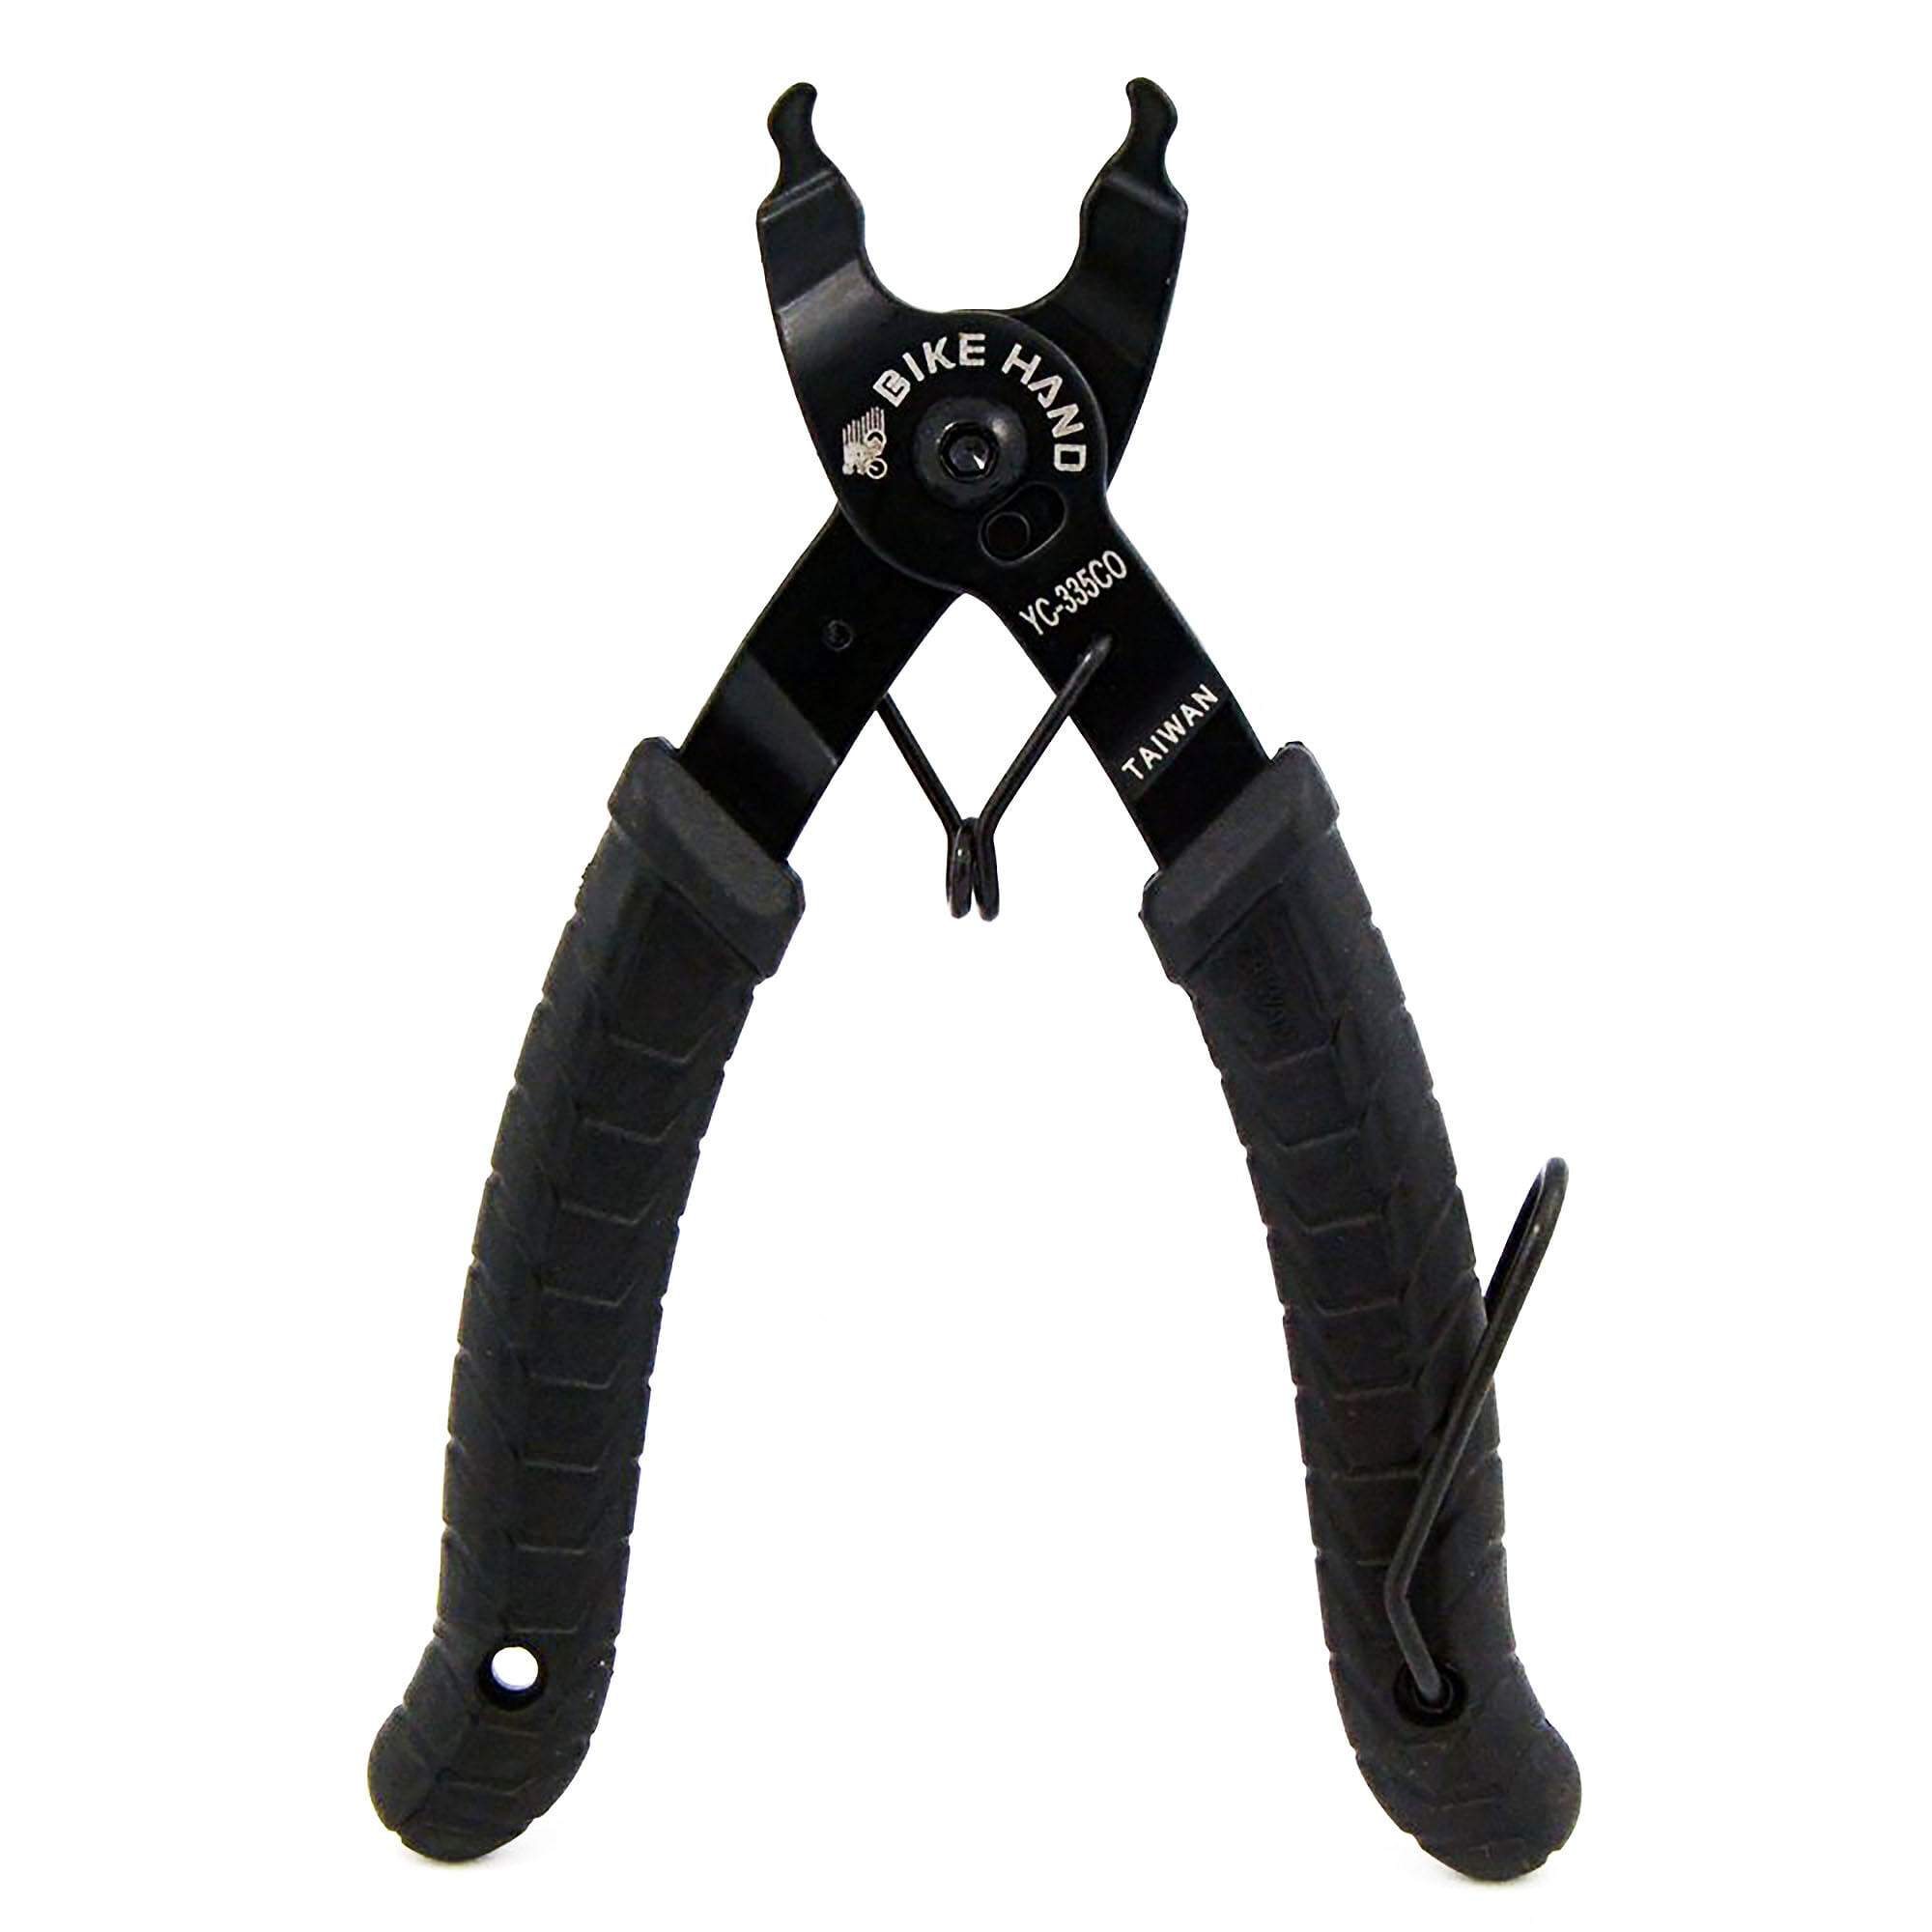 Details about   2 Pcs Bike Bicycle Chain Repair kit Quick Master Link Pliers Cutter Tool USA 